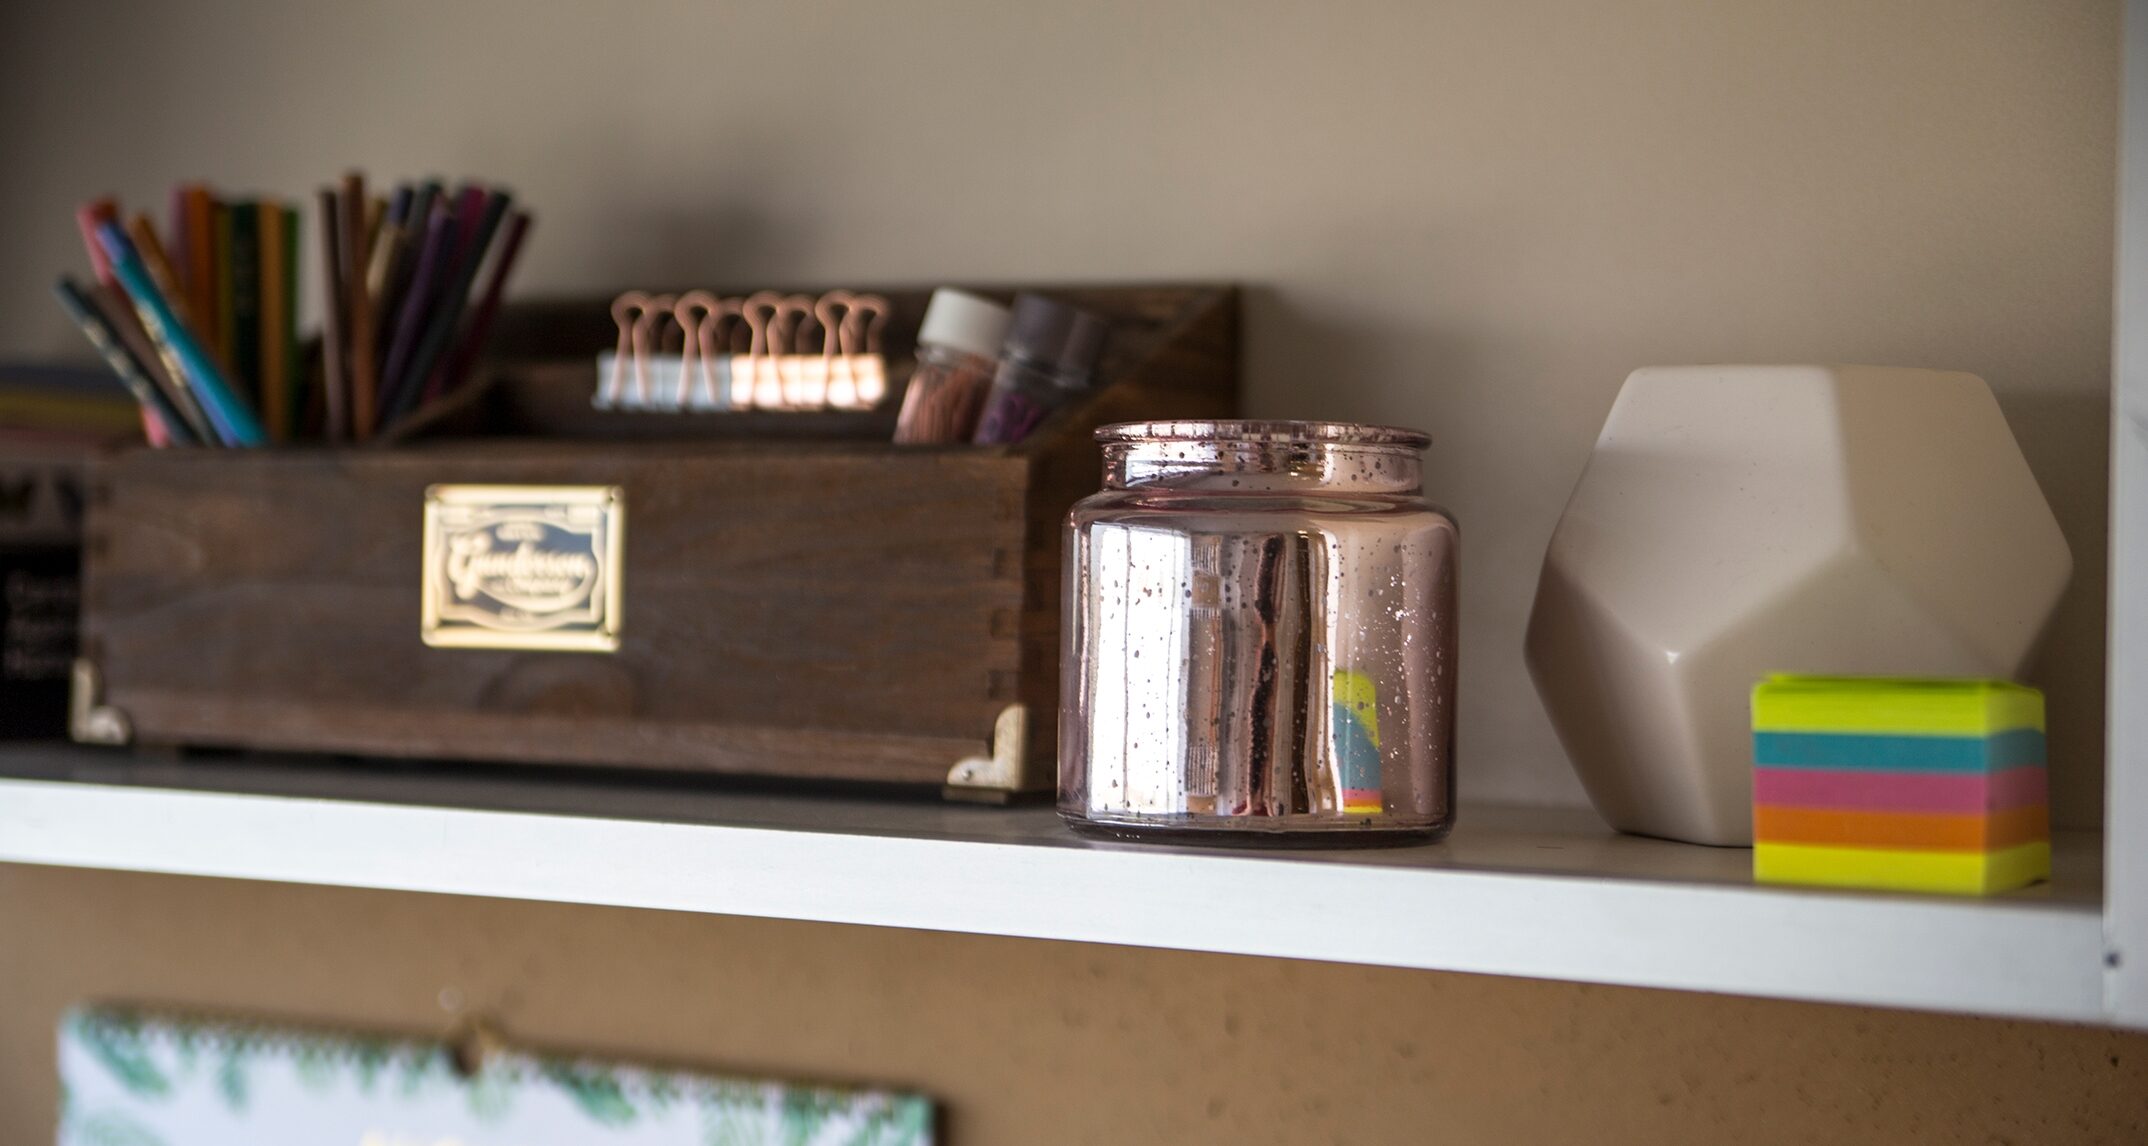 Organization is key in a limited space; and it can still echo your style preferences.